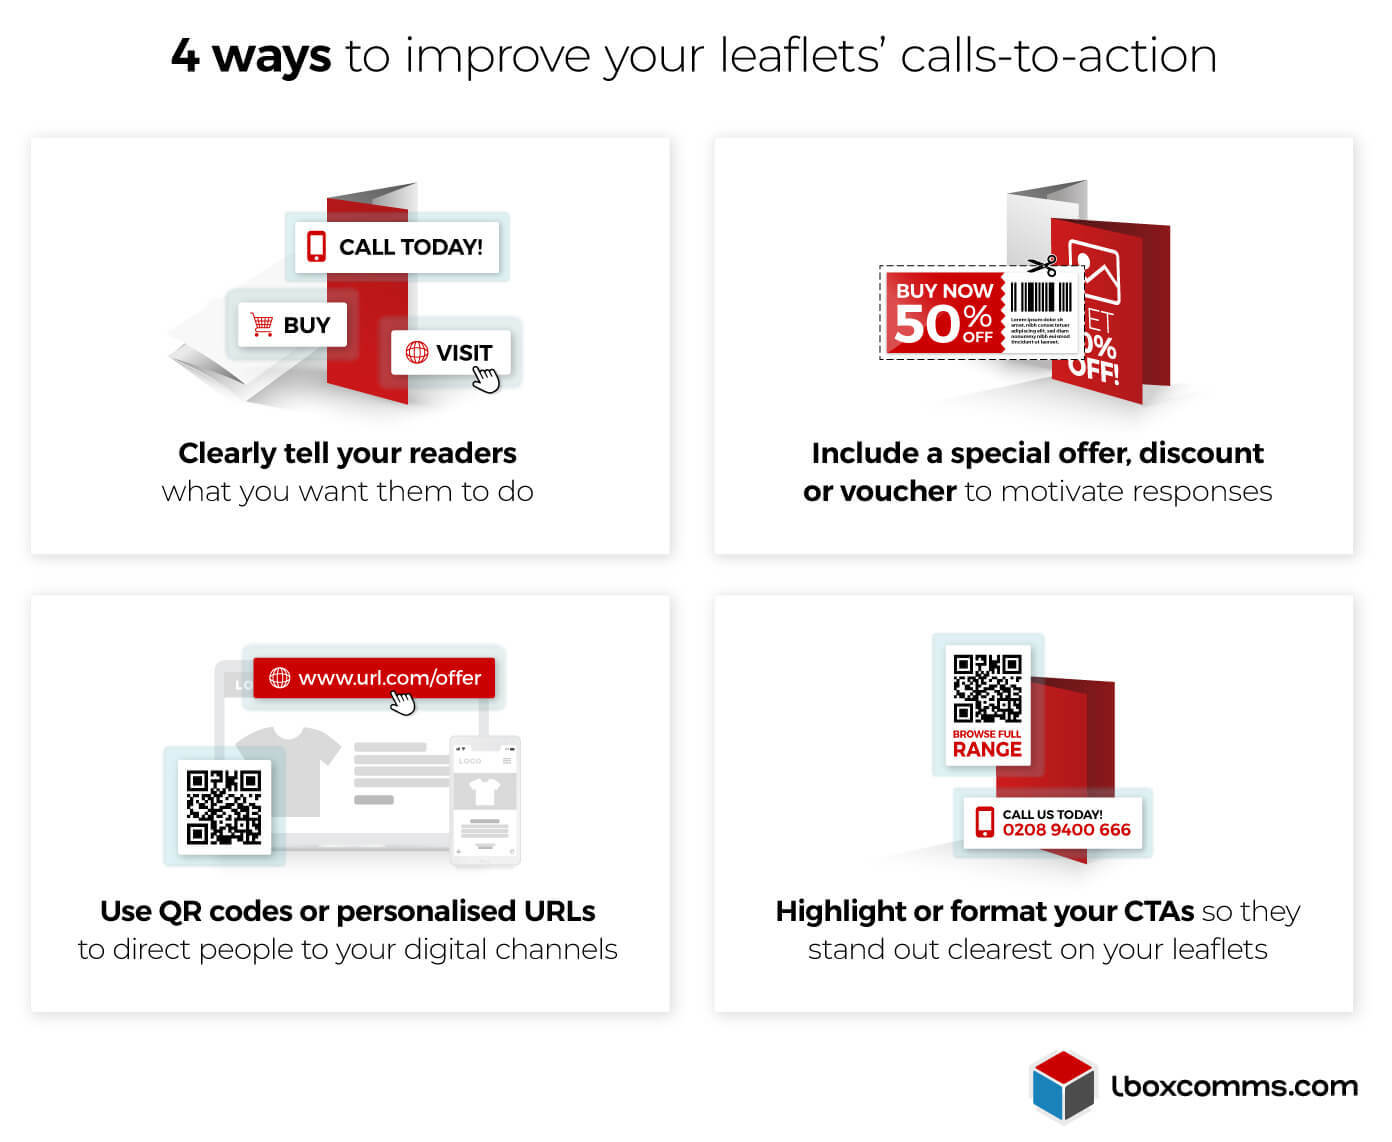 4 ways to improve your leaflets’ calls-to-action